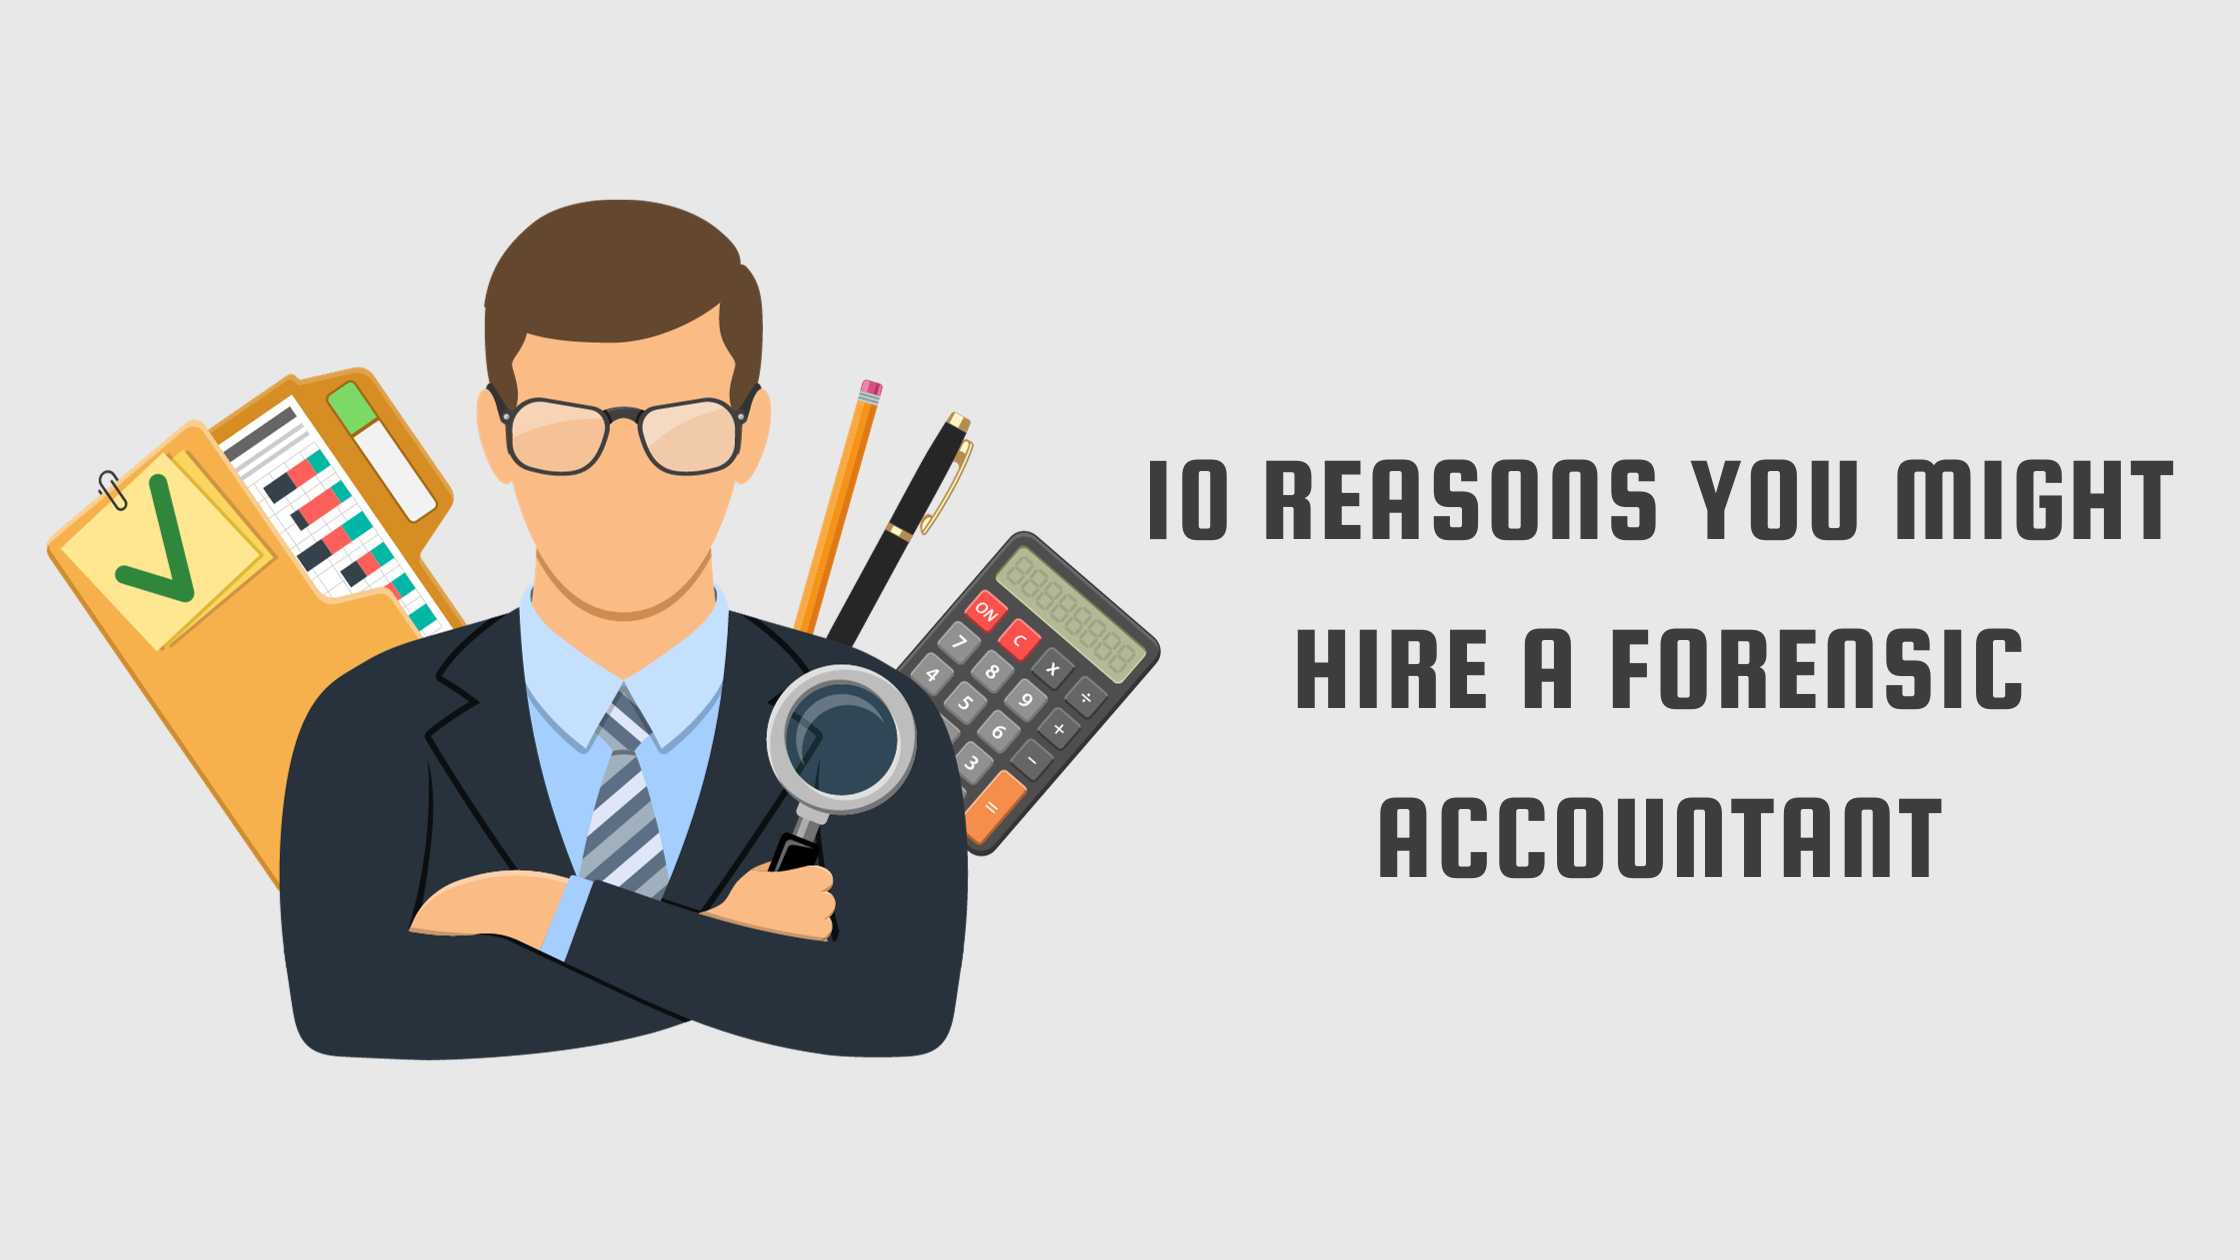 10 Reasons You Might Hire a Forensic Accountant